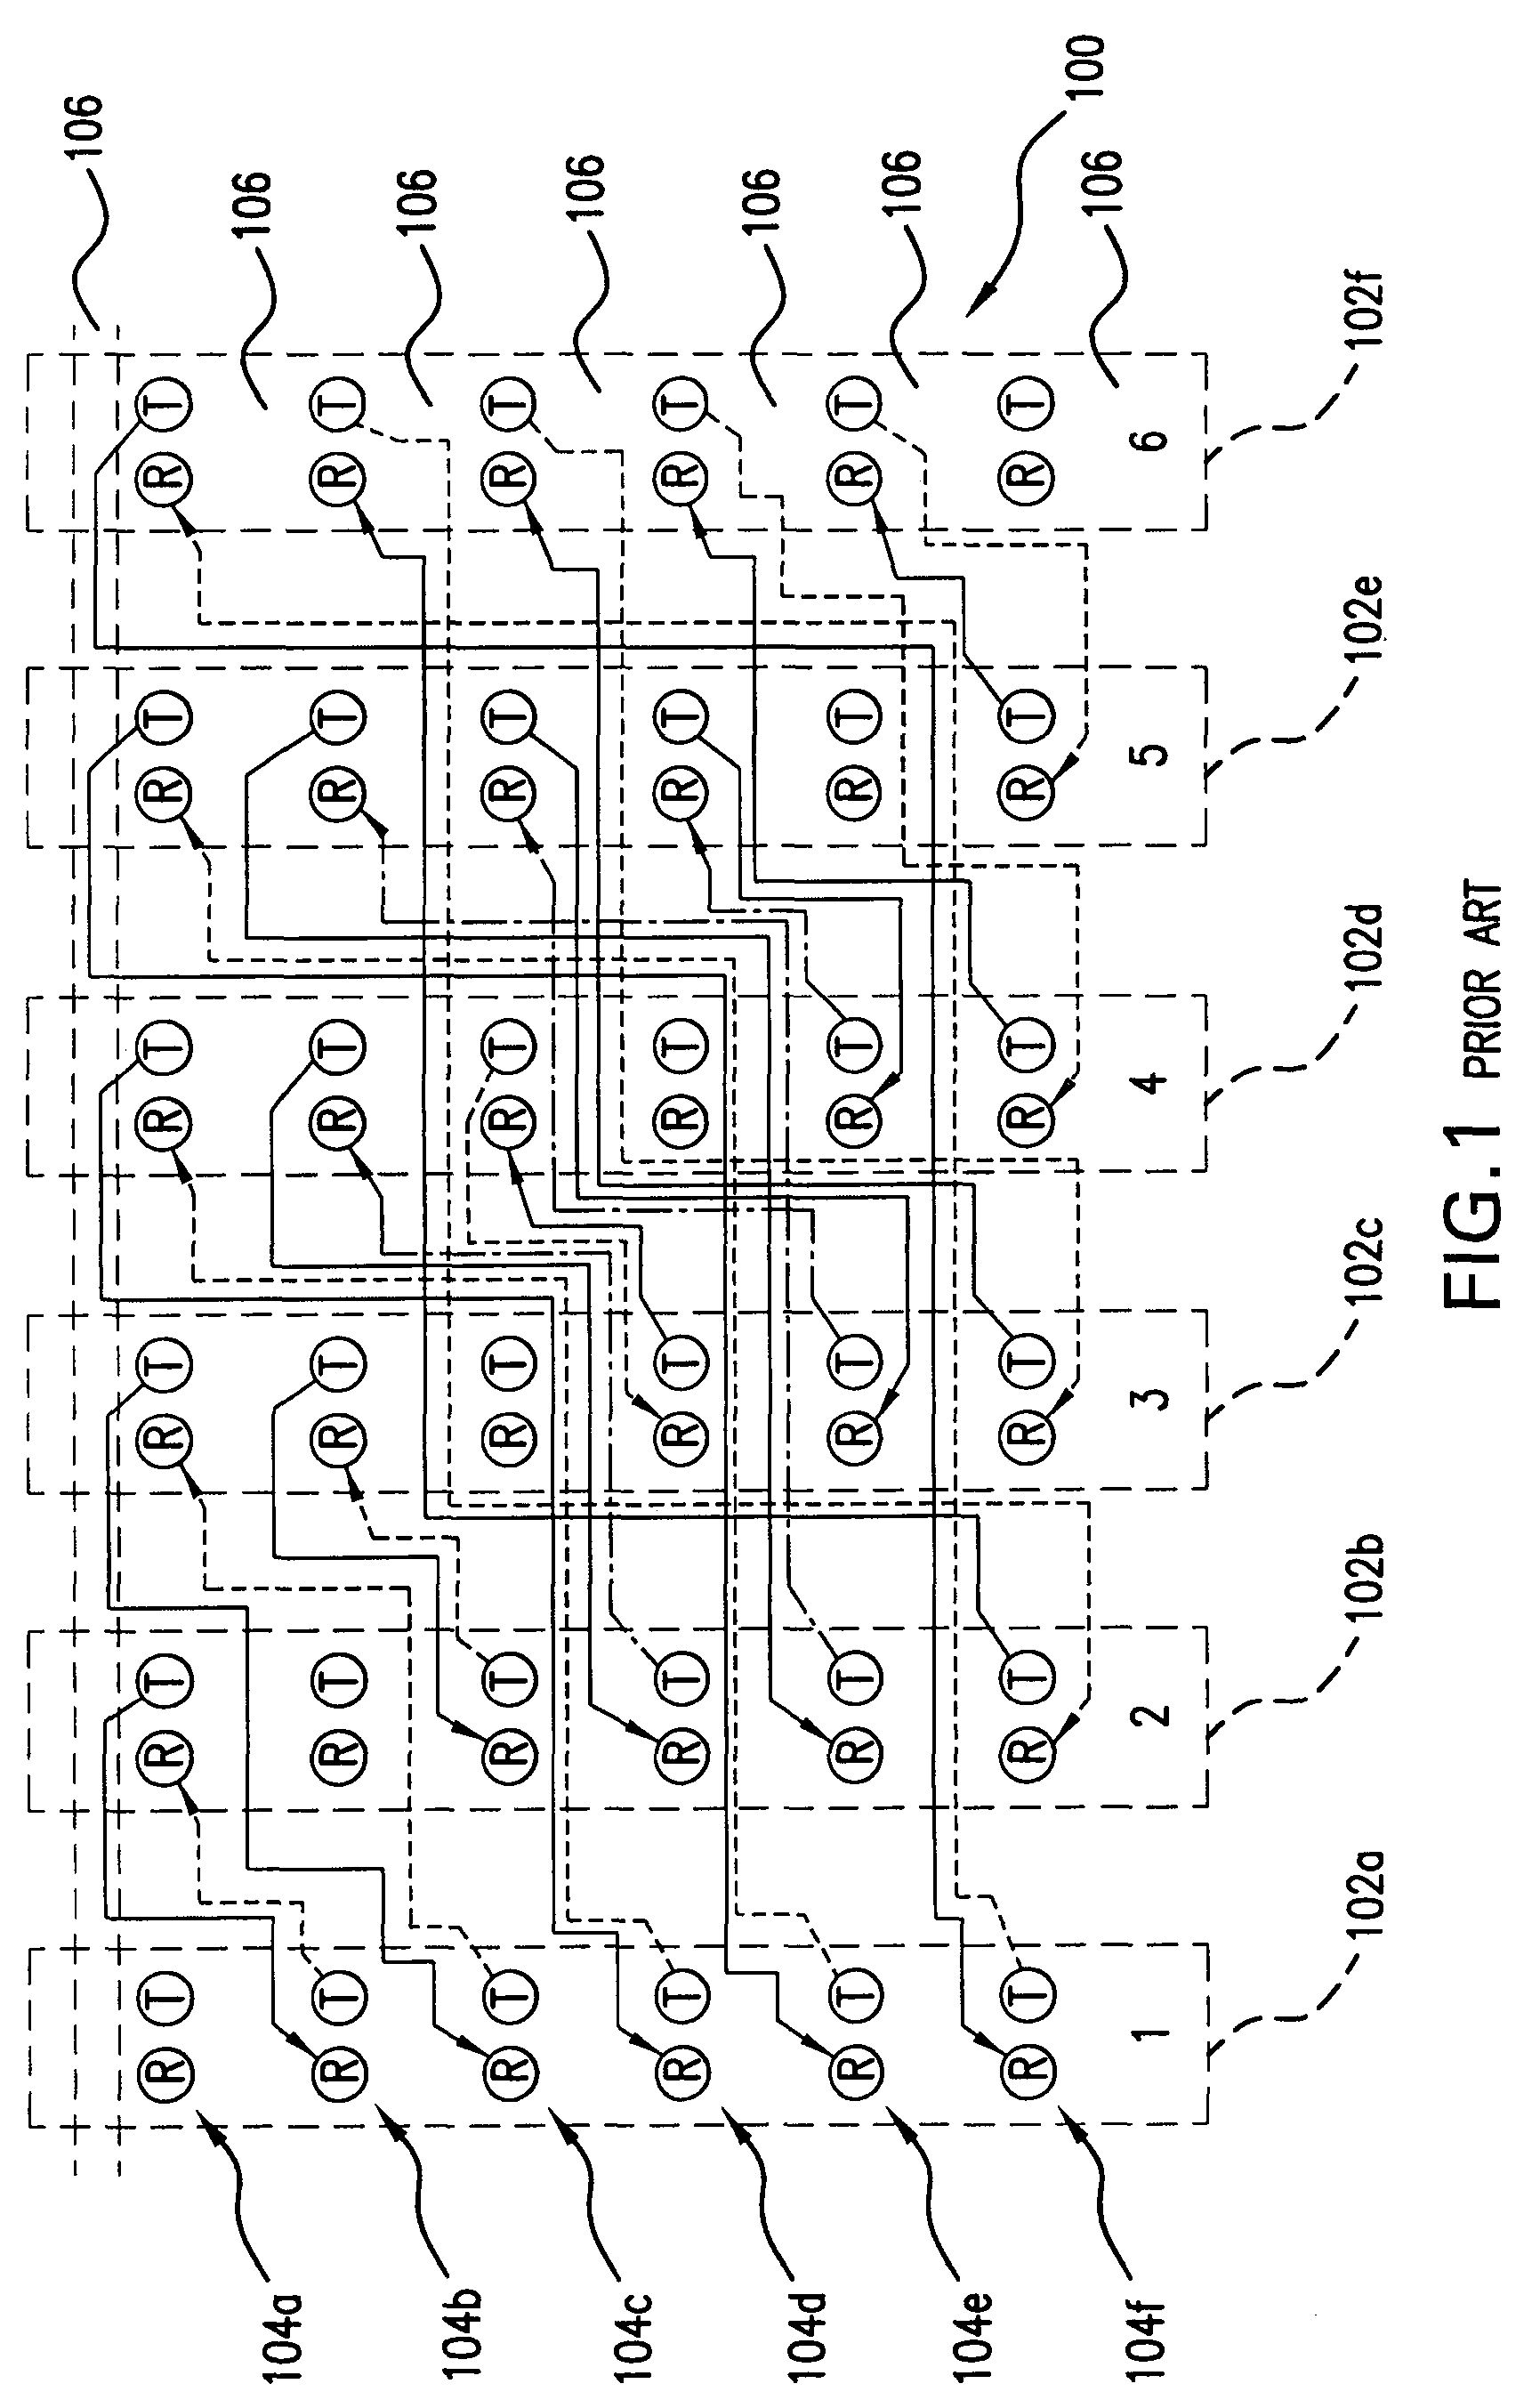 Backplane configuration with shortest-path-relative-shift routing